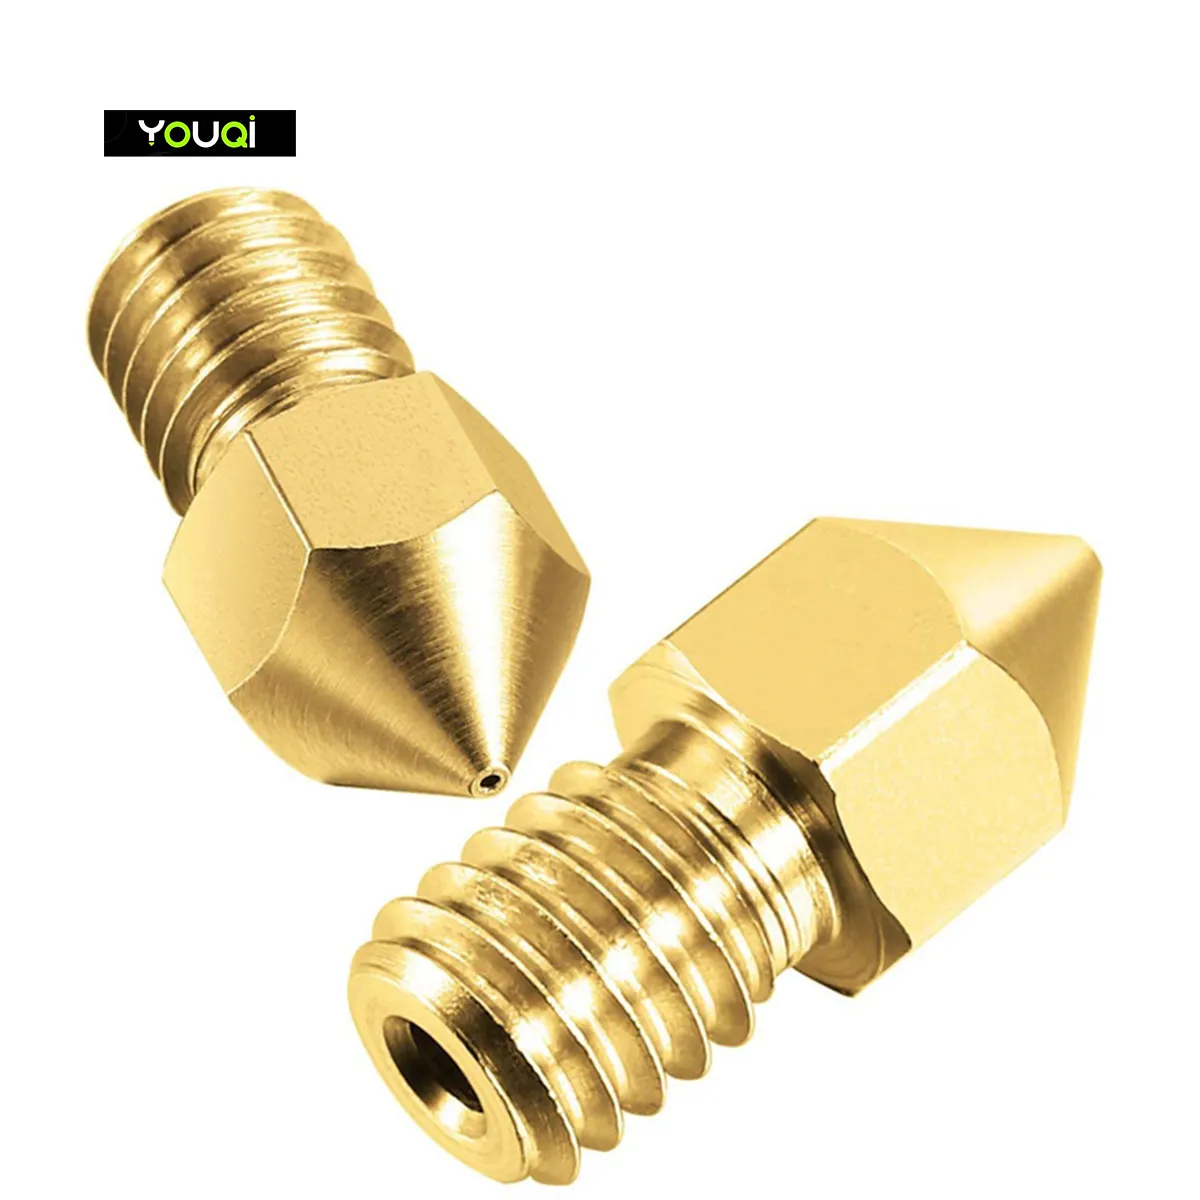 YouQi 3d printer parts MK8 nozzle with 0.2 0.3 0.4 0.5 brass stainless steel